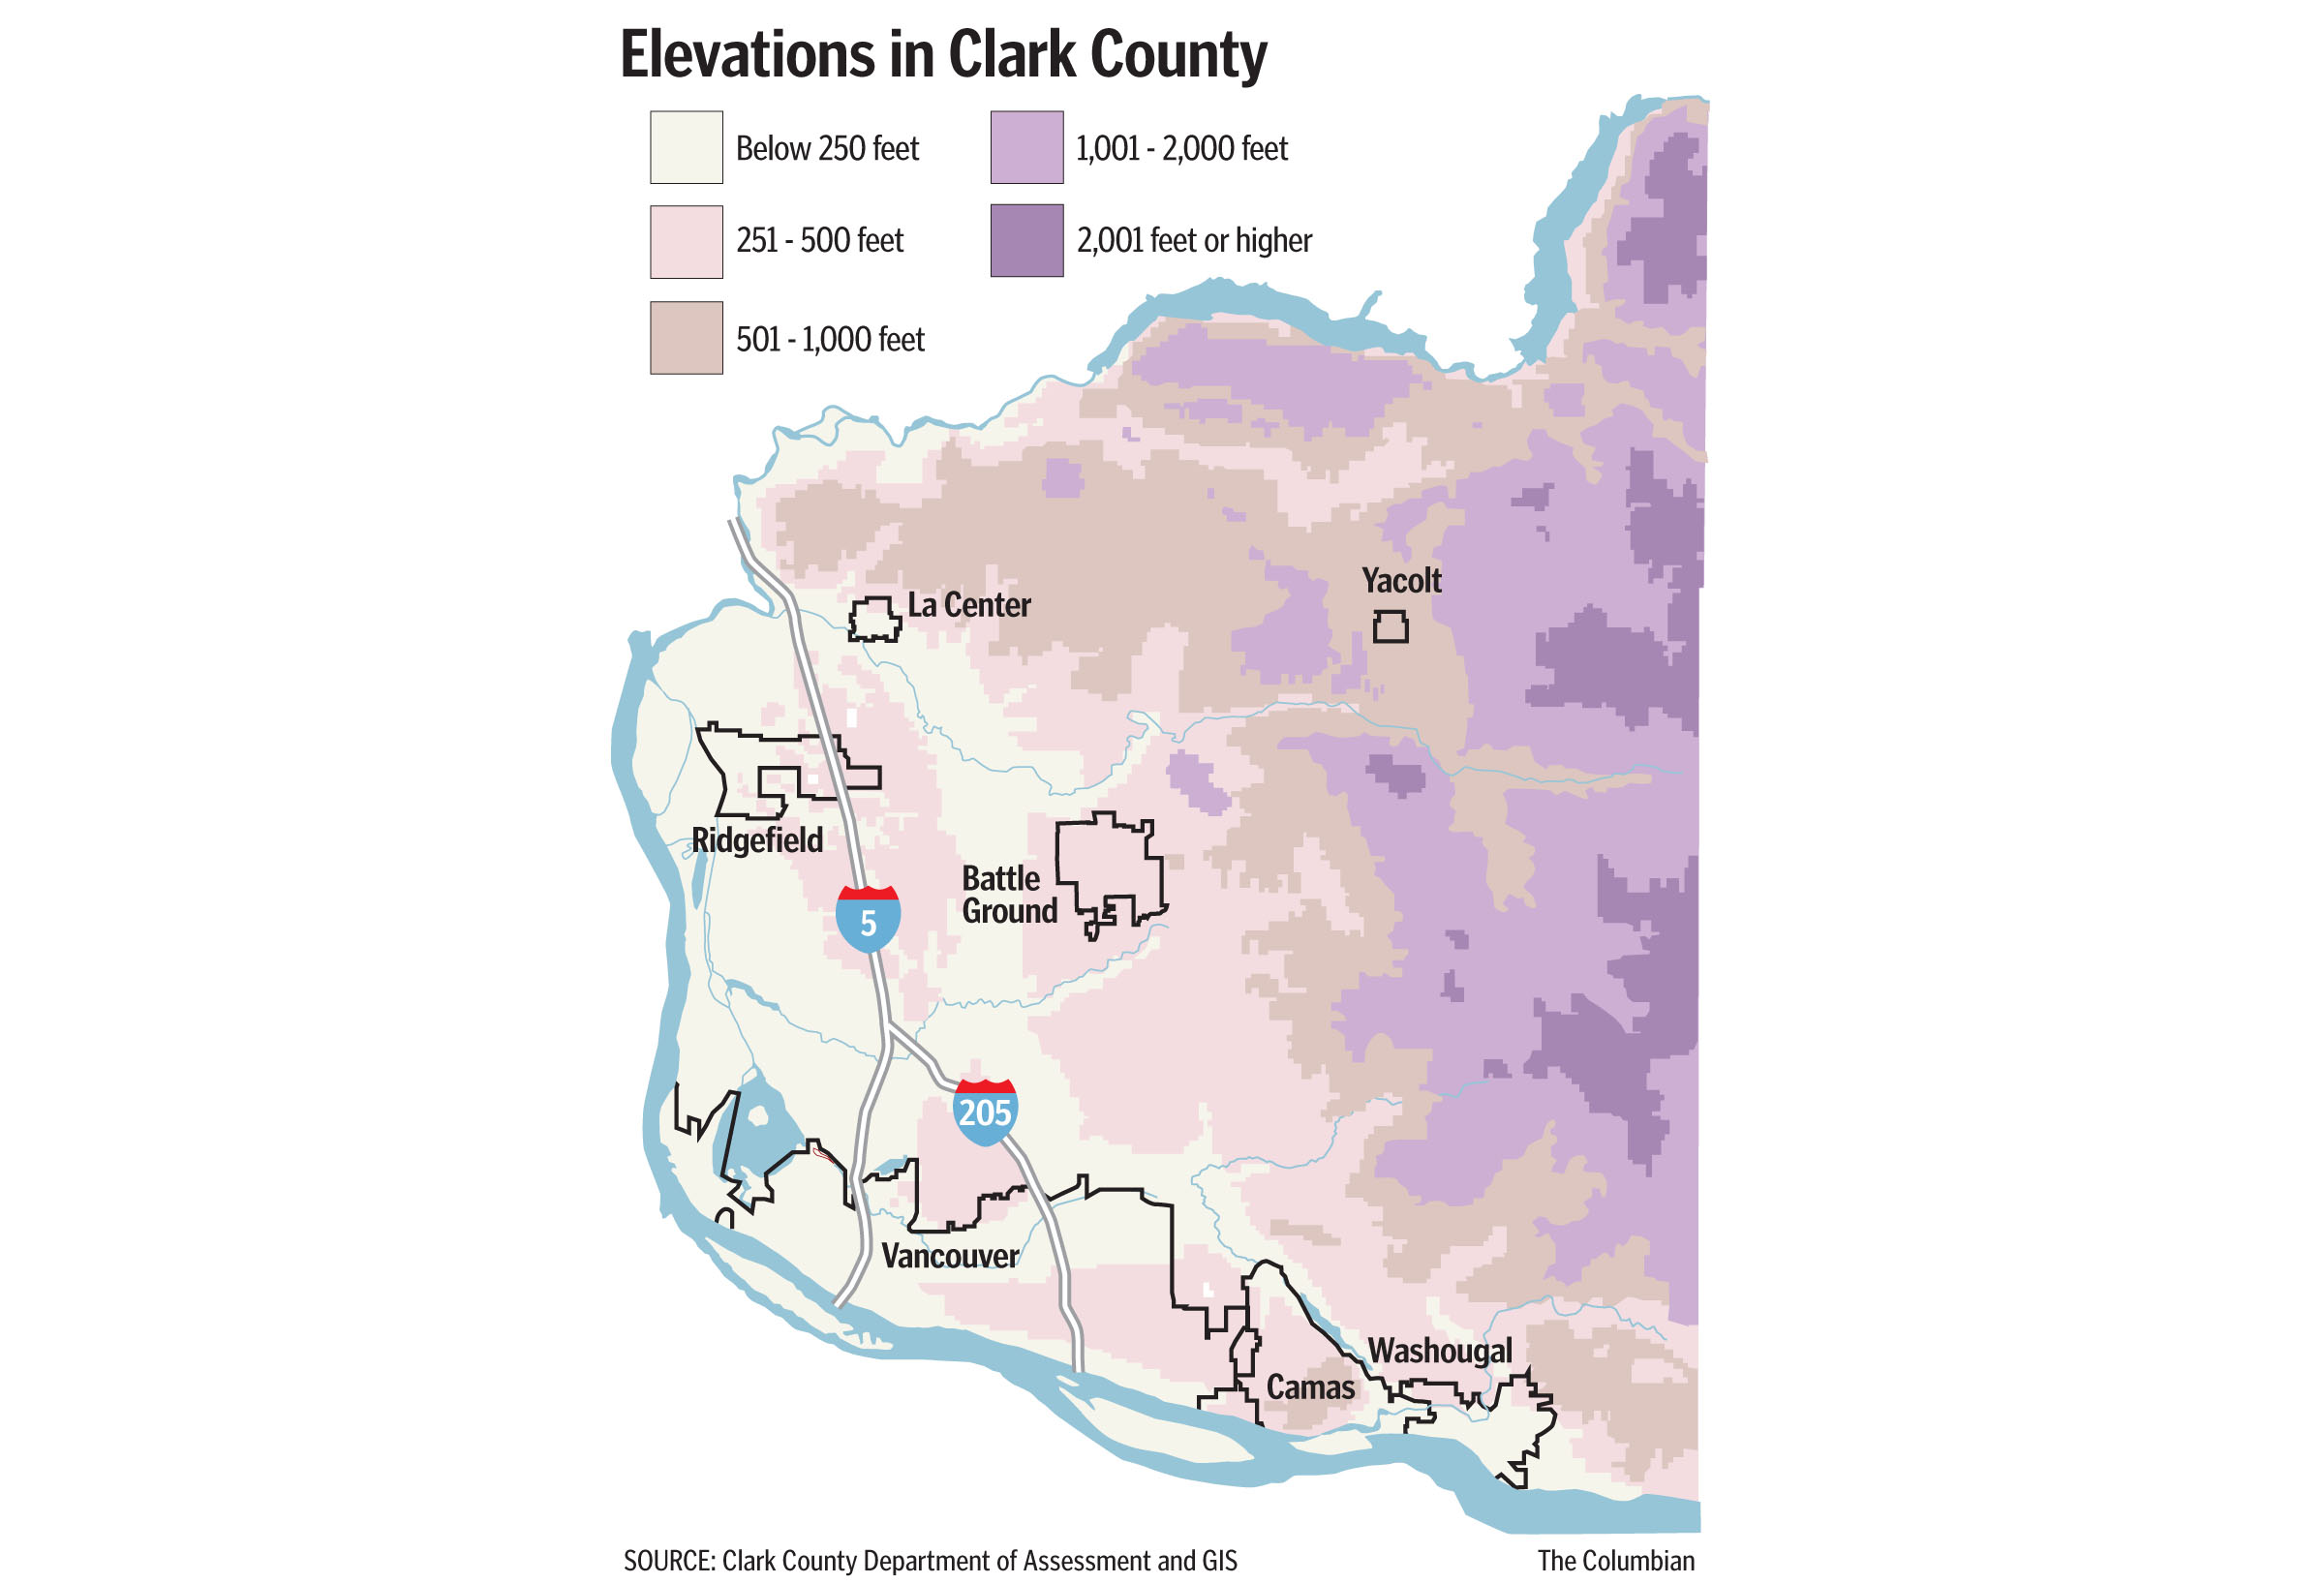 Click the image below to enlarge this map of elevations in Clark County.